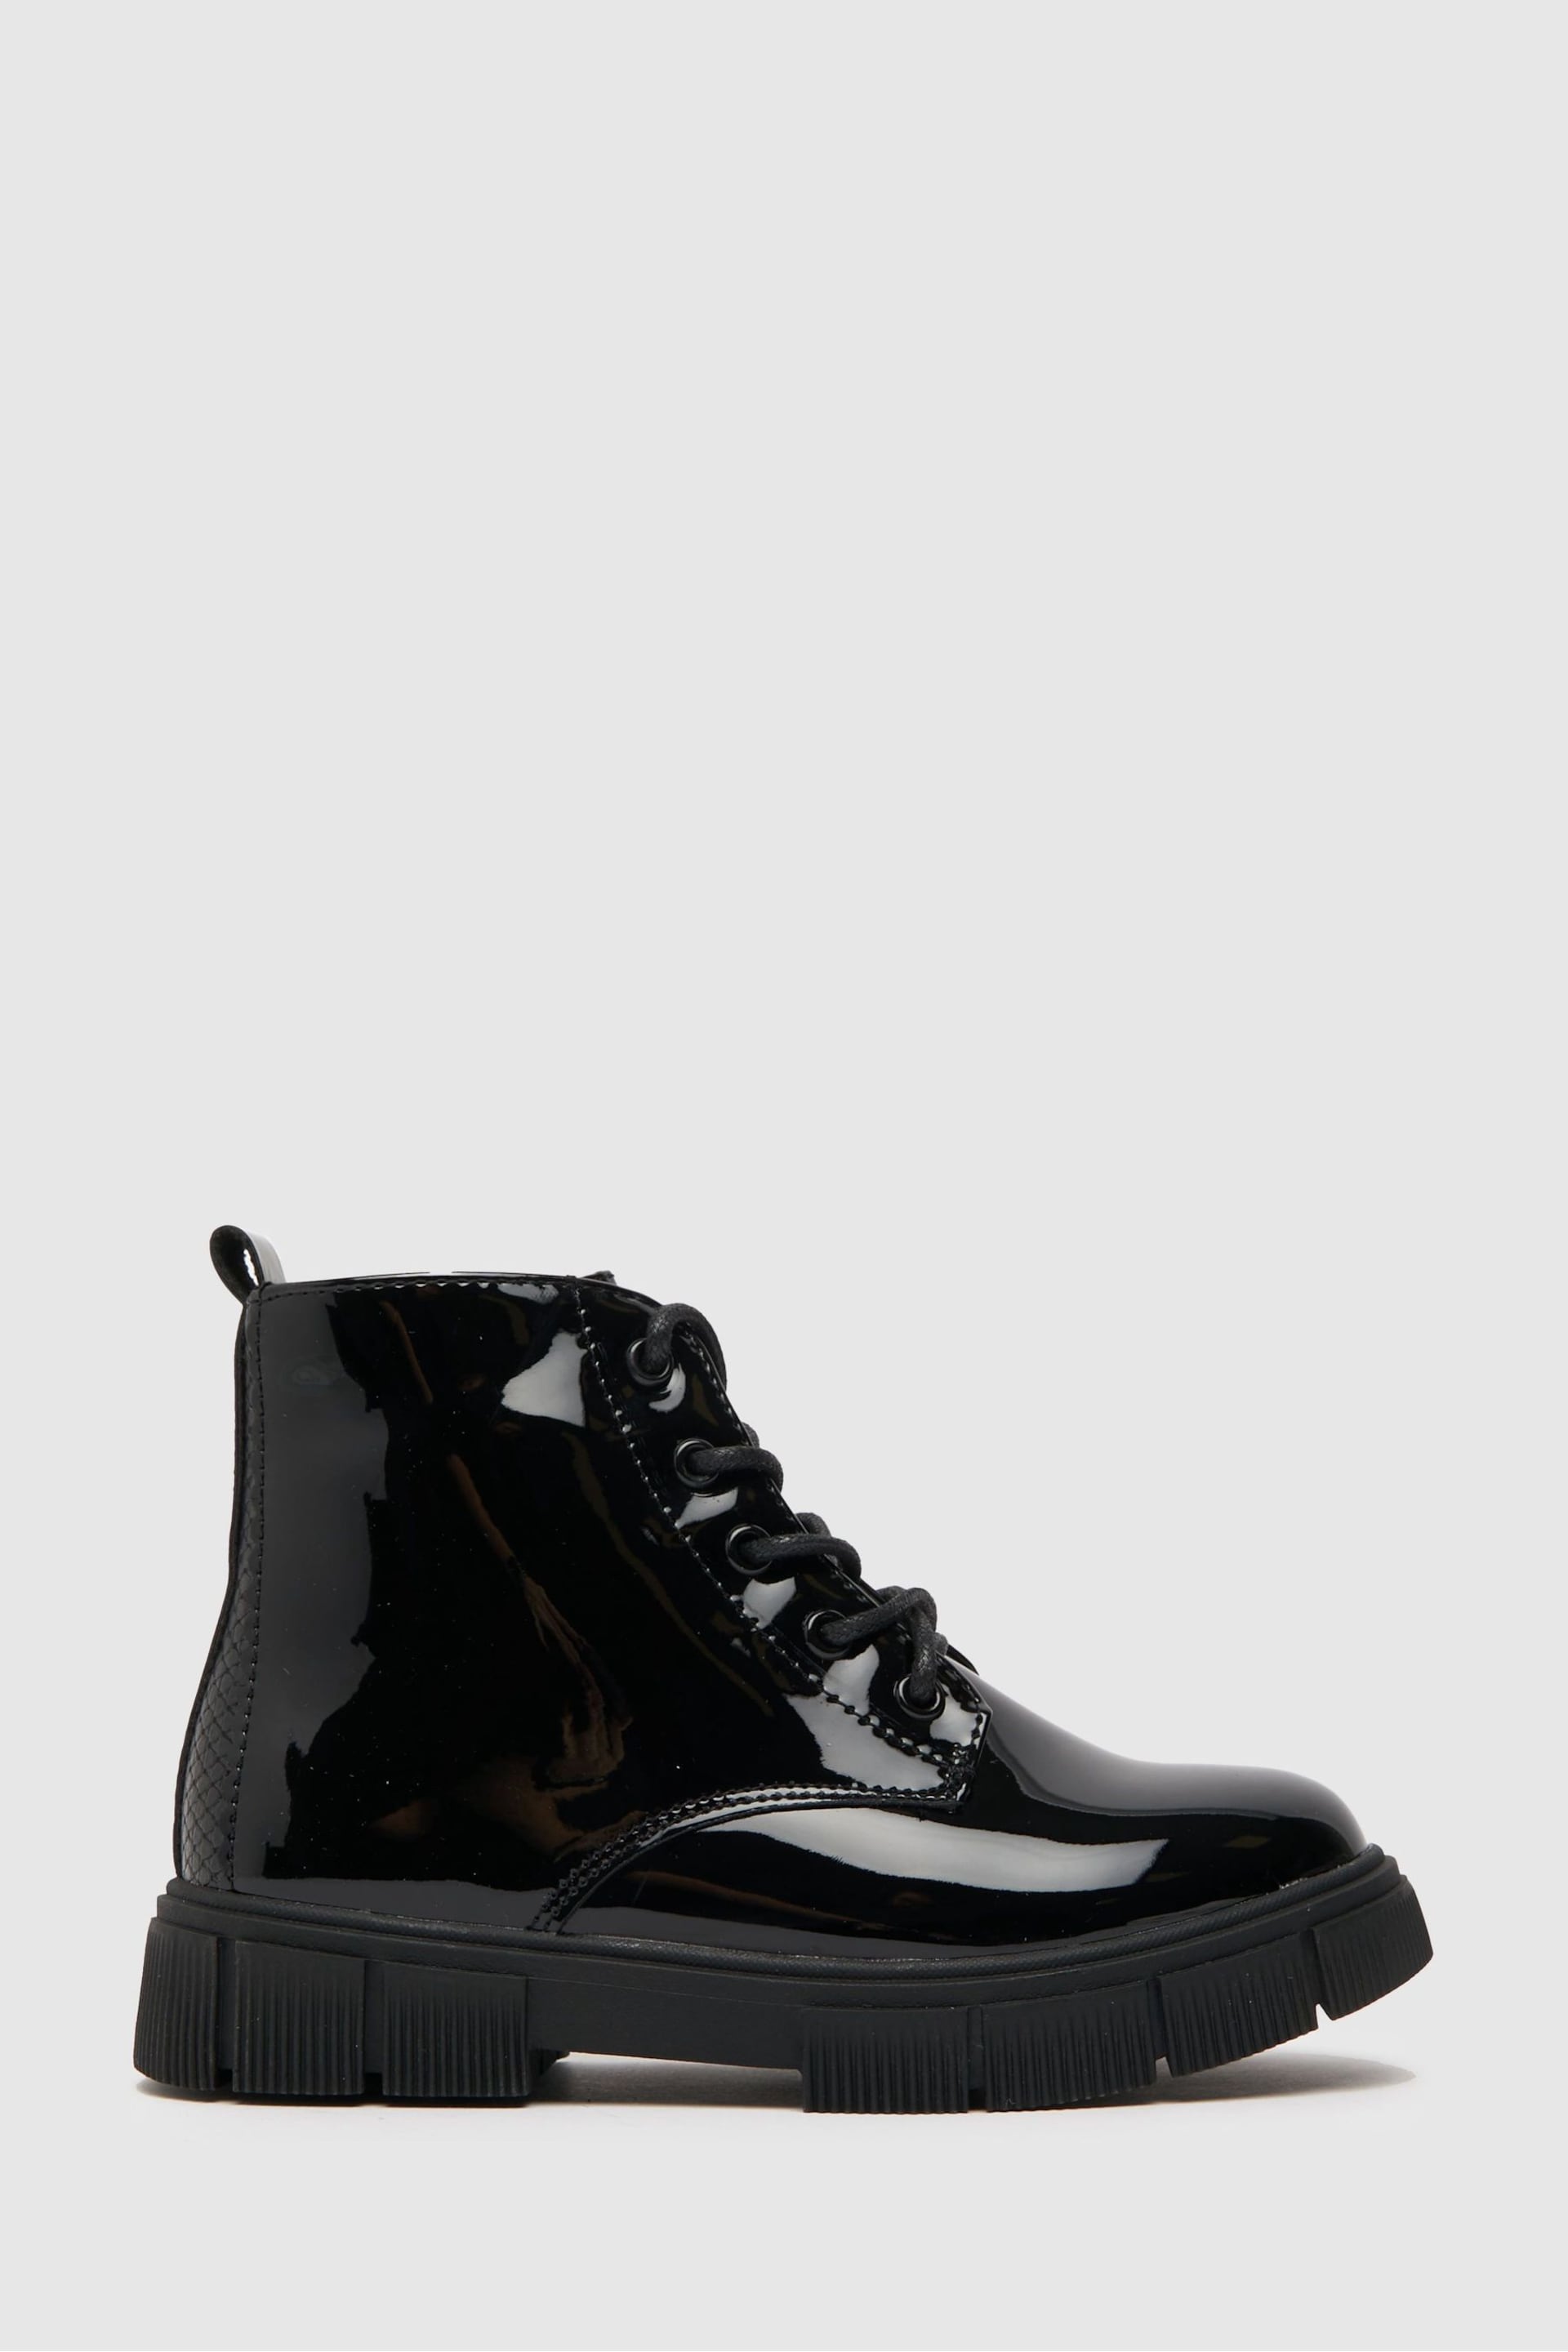 Schuh Black Chant Patent Lace Boots - Image 1 of 4